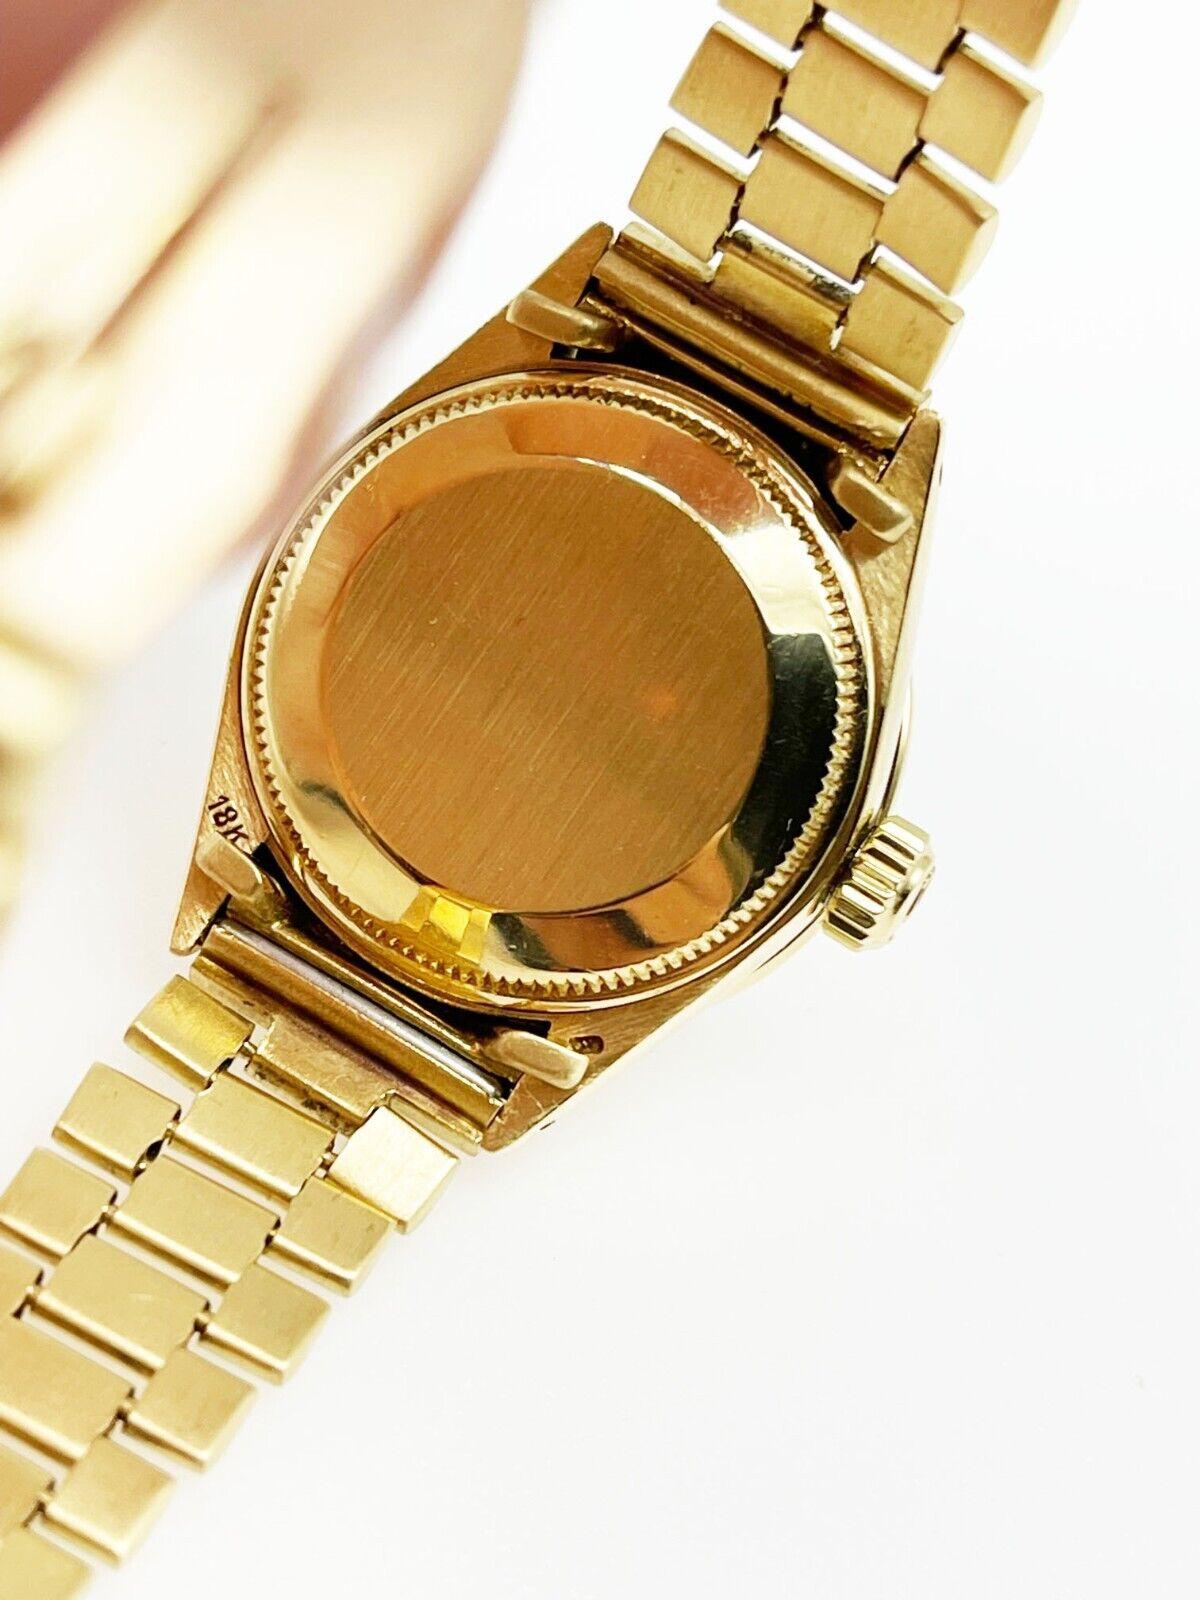 Style Number: 6917

 

Serial: 3407***



Model: Ladies President

 

Case Material: 18K Yellow Gold

 

Band: 18K Yellow Gold

 

Bezel:  Custom diamond bezel

 

Dial: Champagne custom diamond marker dial

 

Face: Acrylic

 

Case Size: 26mm

